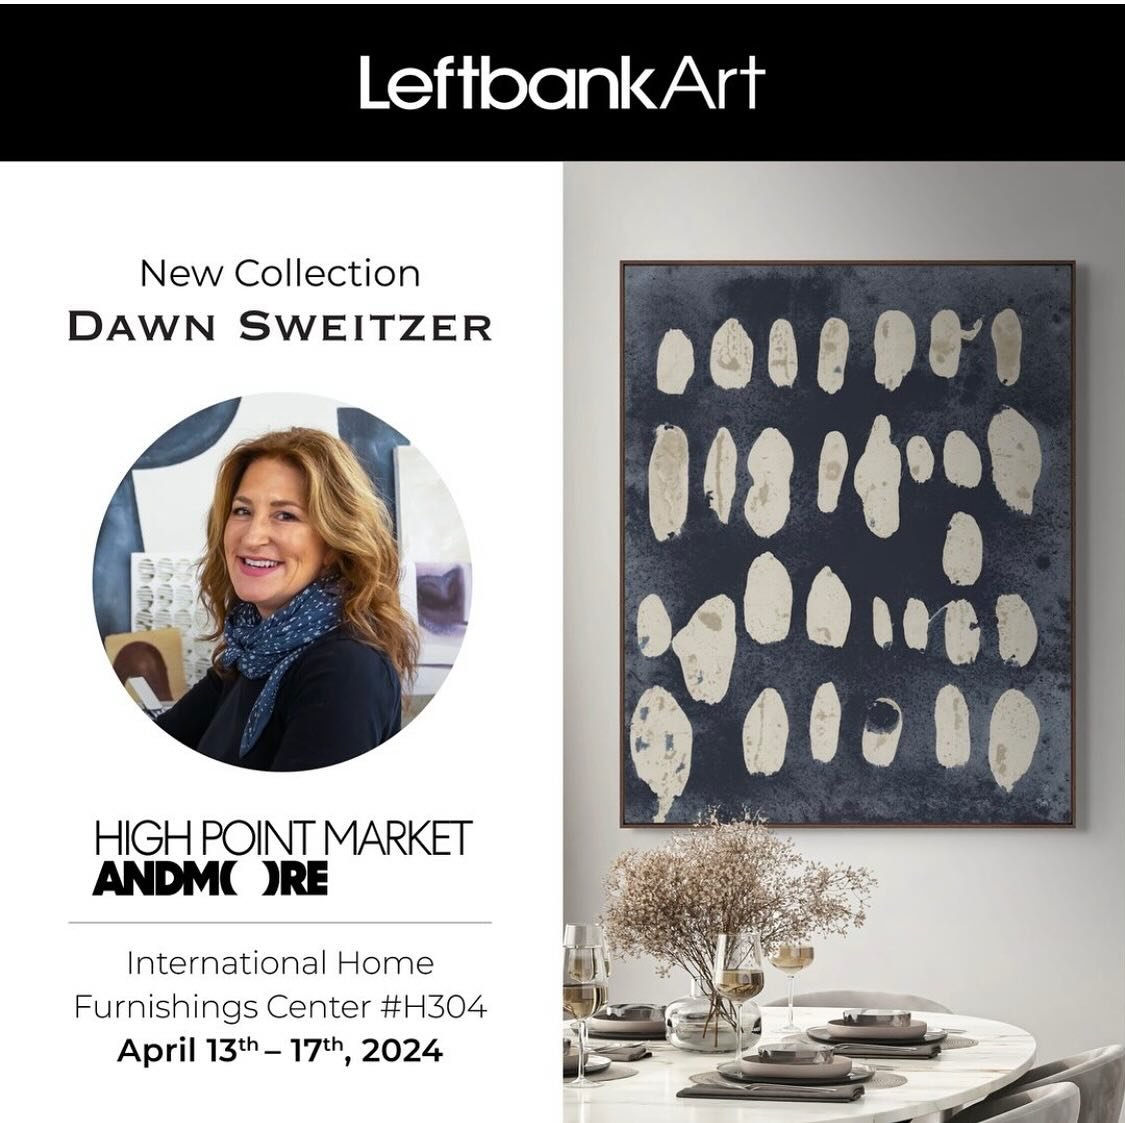 So happy to announce that I&rsquo;ll be at the Leftbank Art High Point Showroom today from 10am-12pm! I can&rsquo;t wait to see everyone and to introduce you to the new Leftbank Art x Dawn Sweitzer collection! See you there! 💗

#dawnsweitzerstudio #